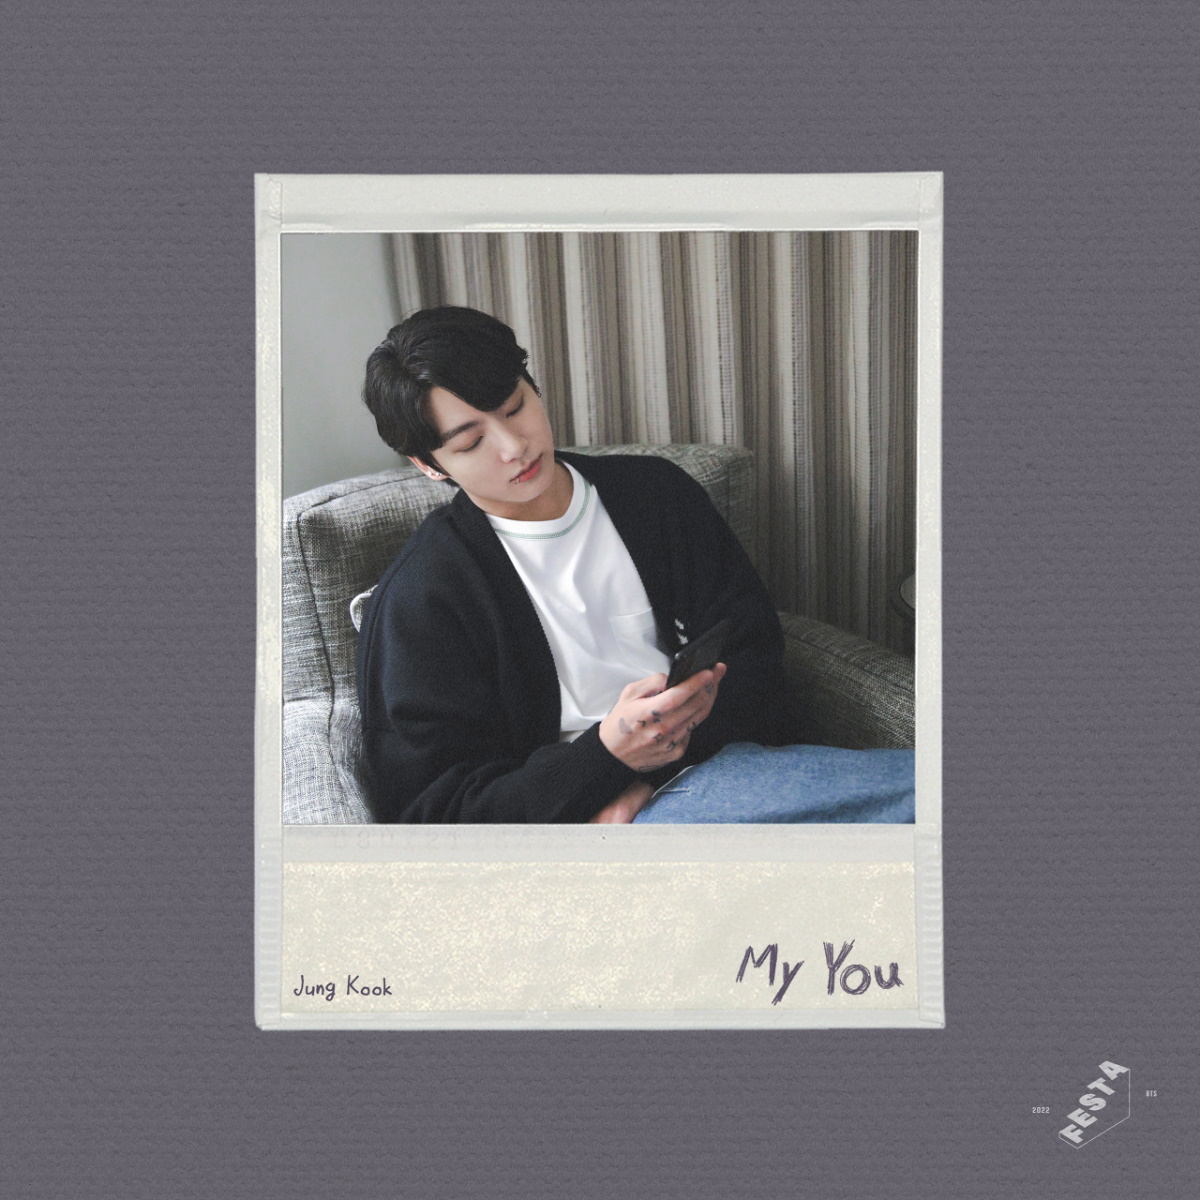 Cover art for『Jung Kook (BTS) - My You』from the release『My You』